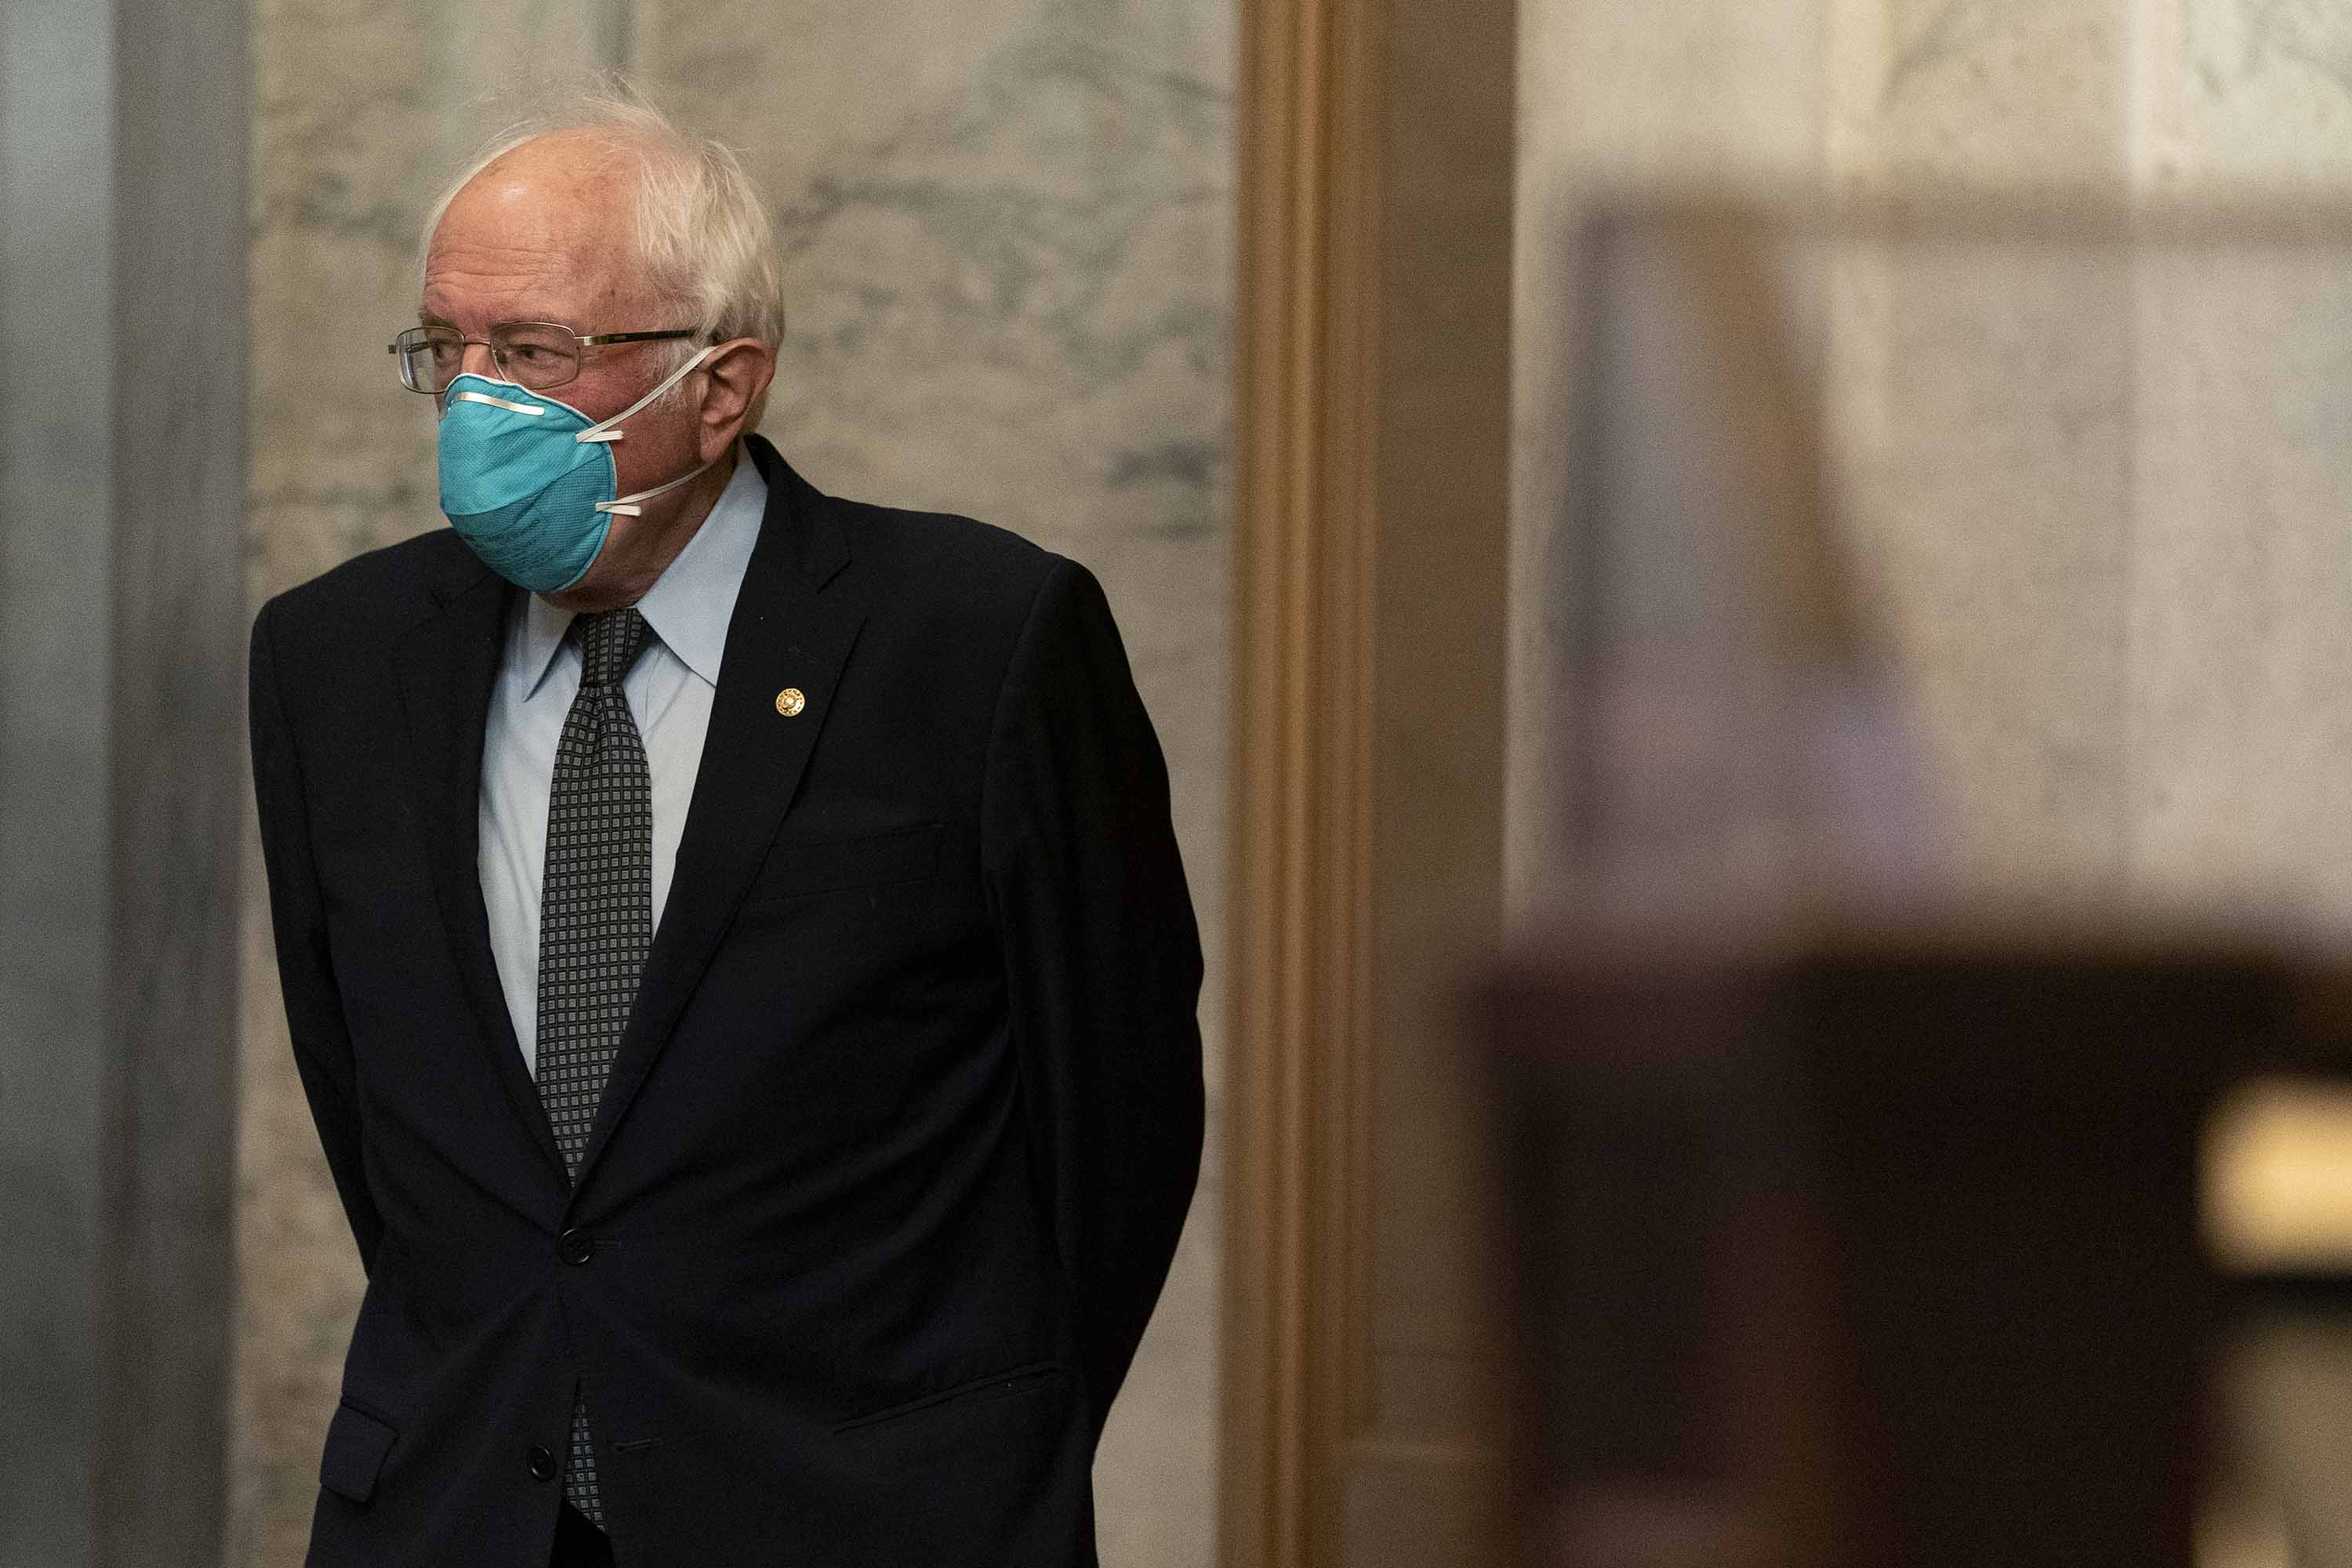 Senator Bernie Sanders is pictured at the U.S. Capitol on October 20, in Washington, D.C.